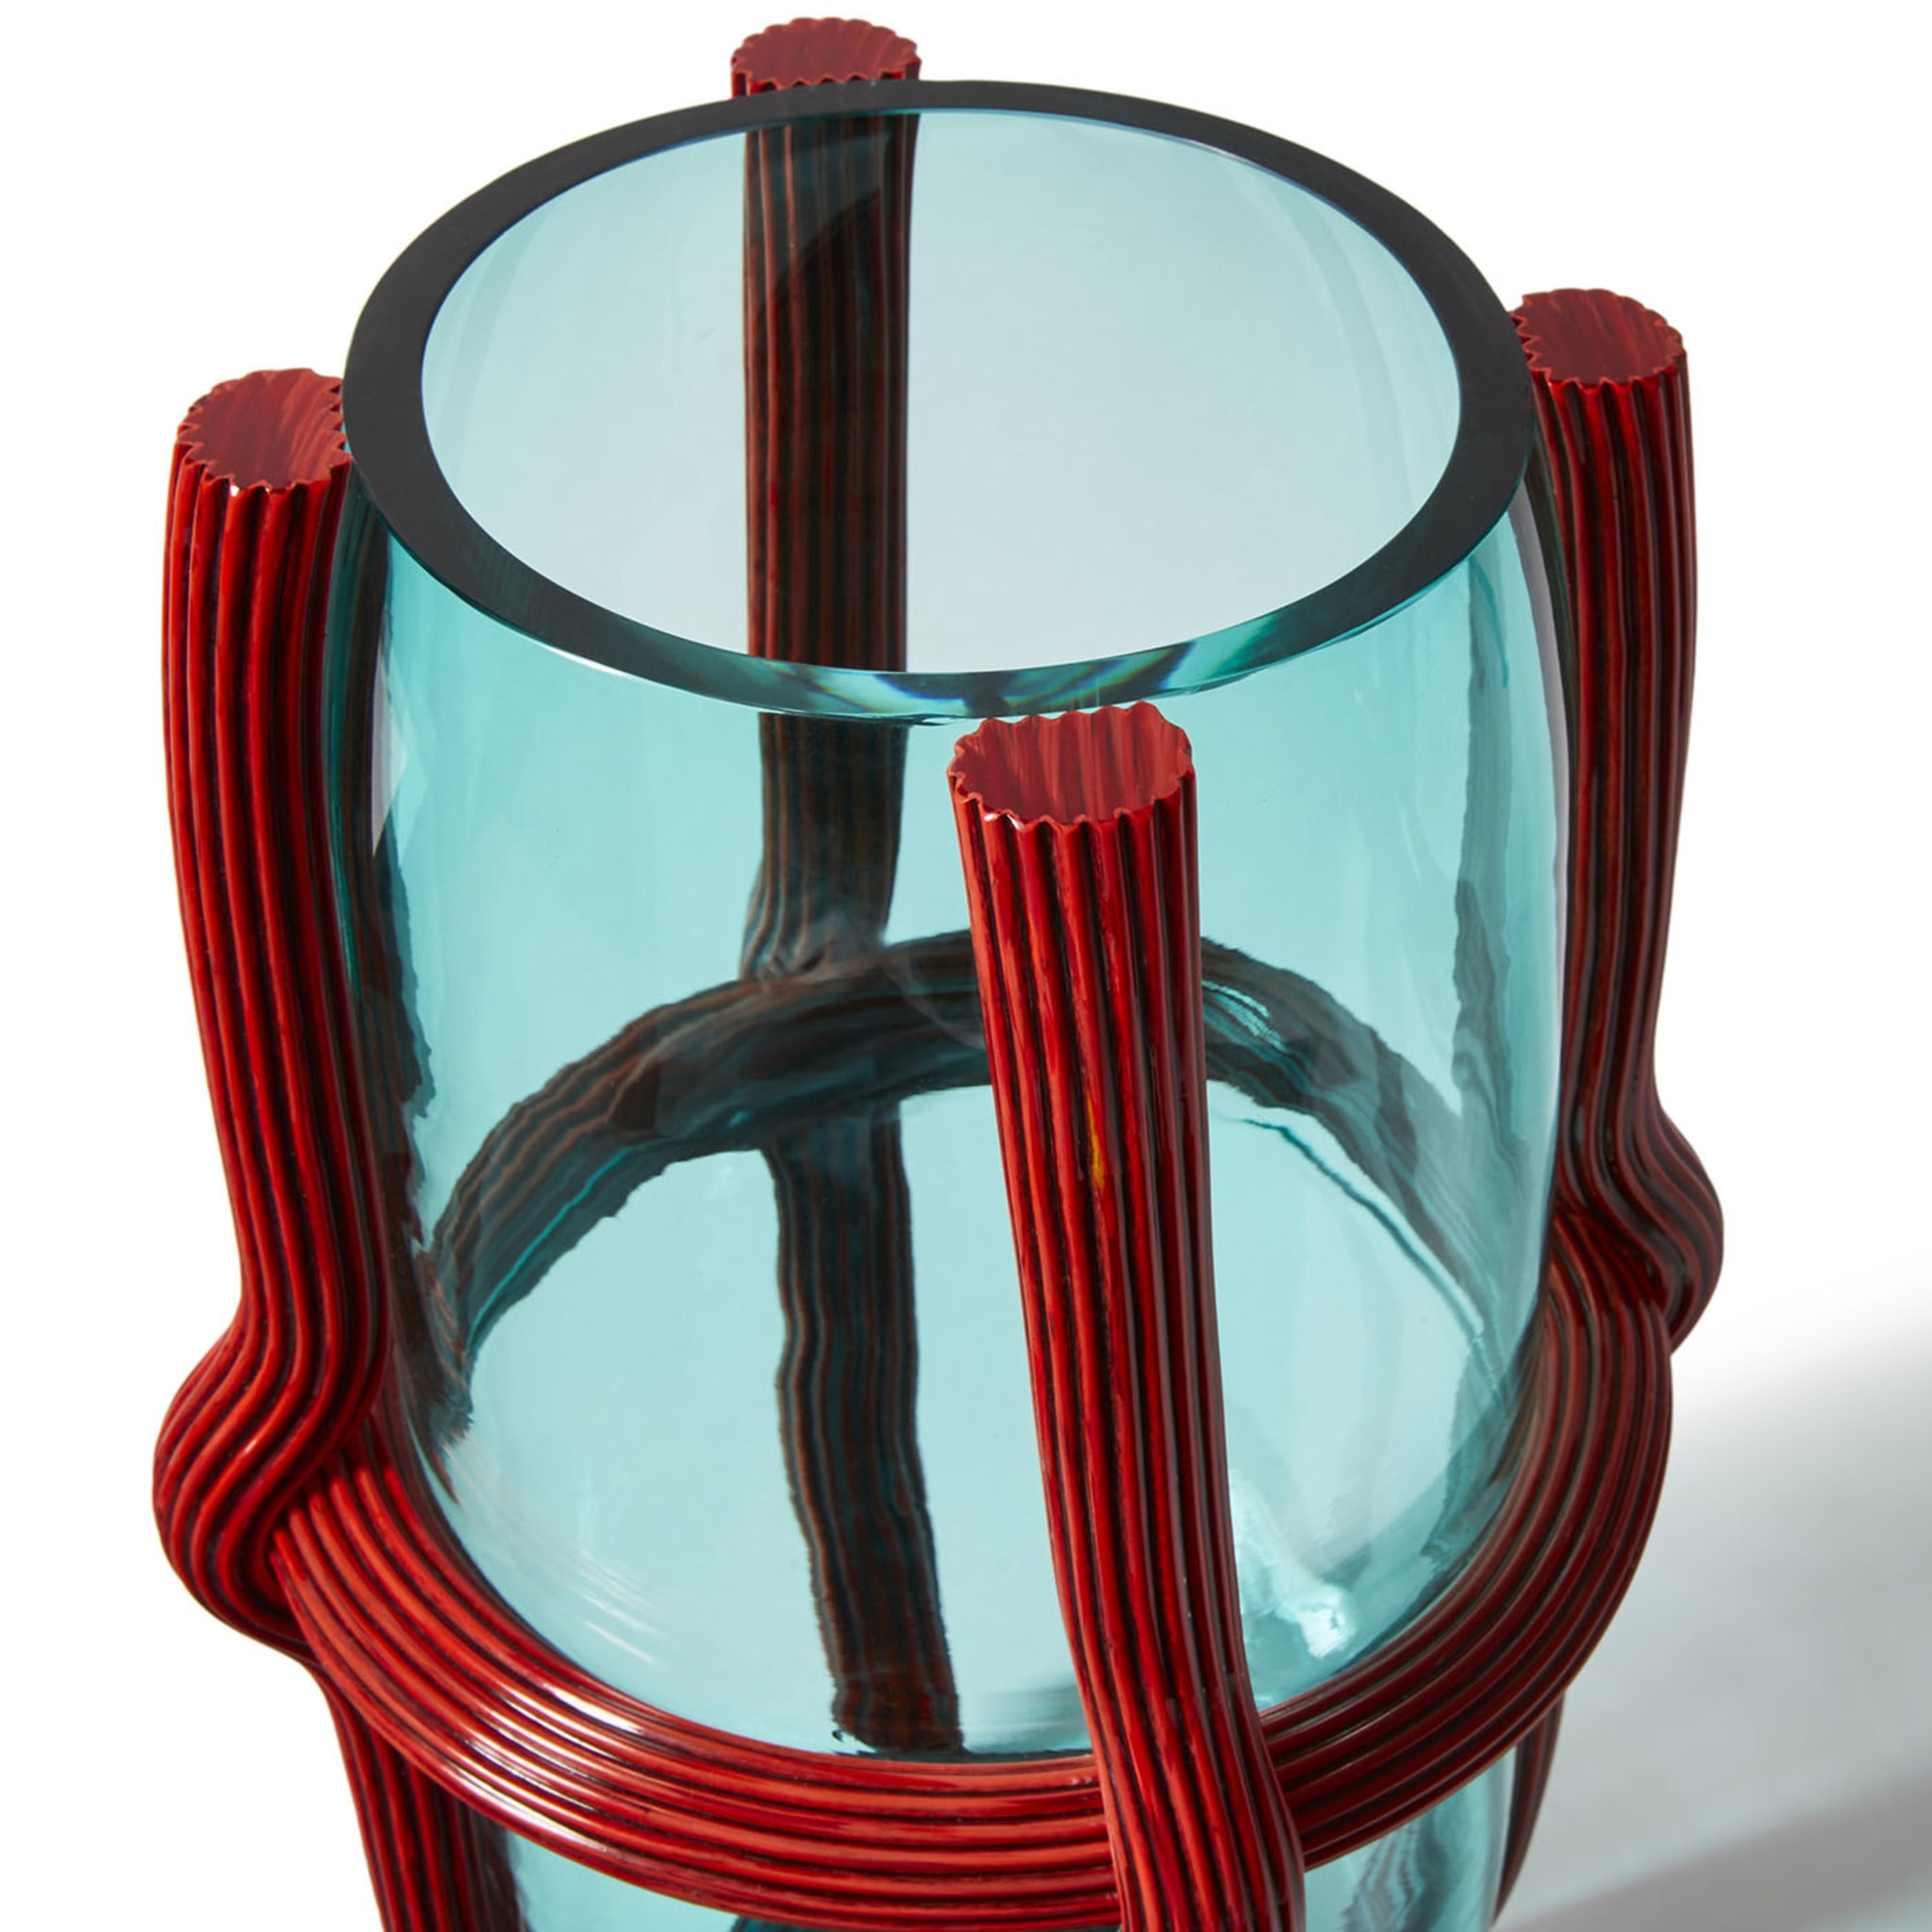 Sestiere Tall Red & Turquoise Vase by Patricia Urquiola - Alternative view 1